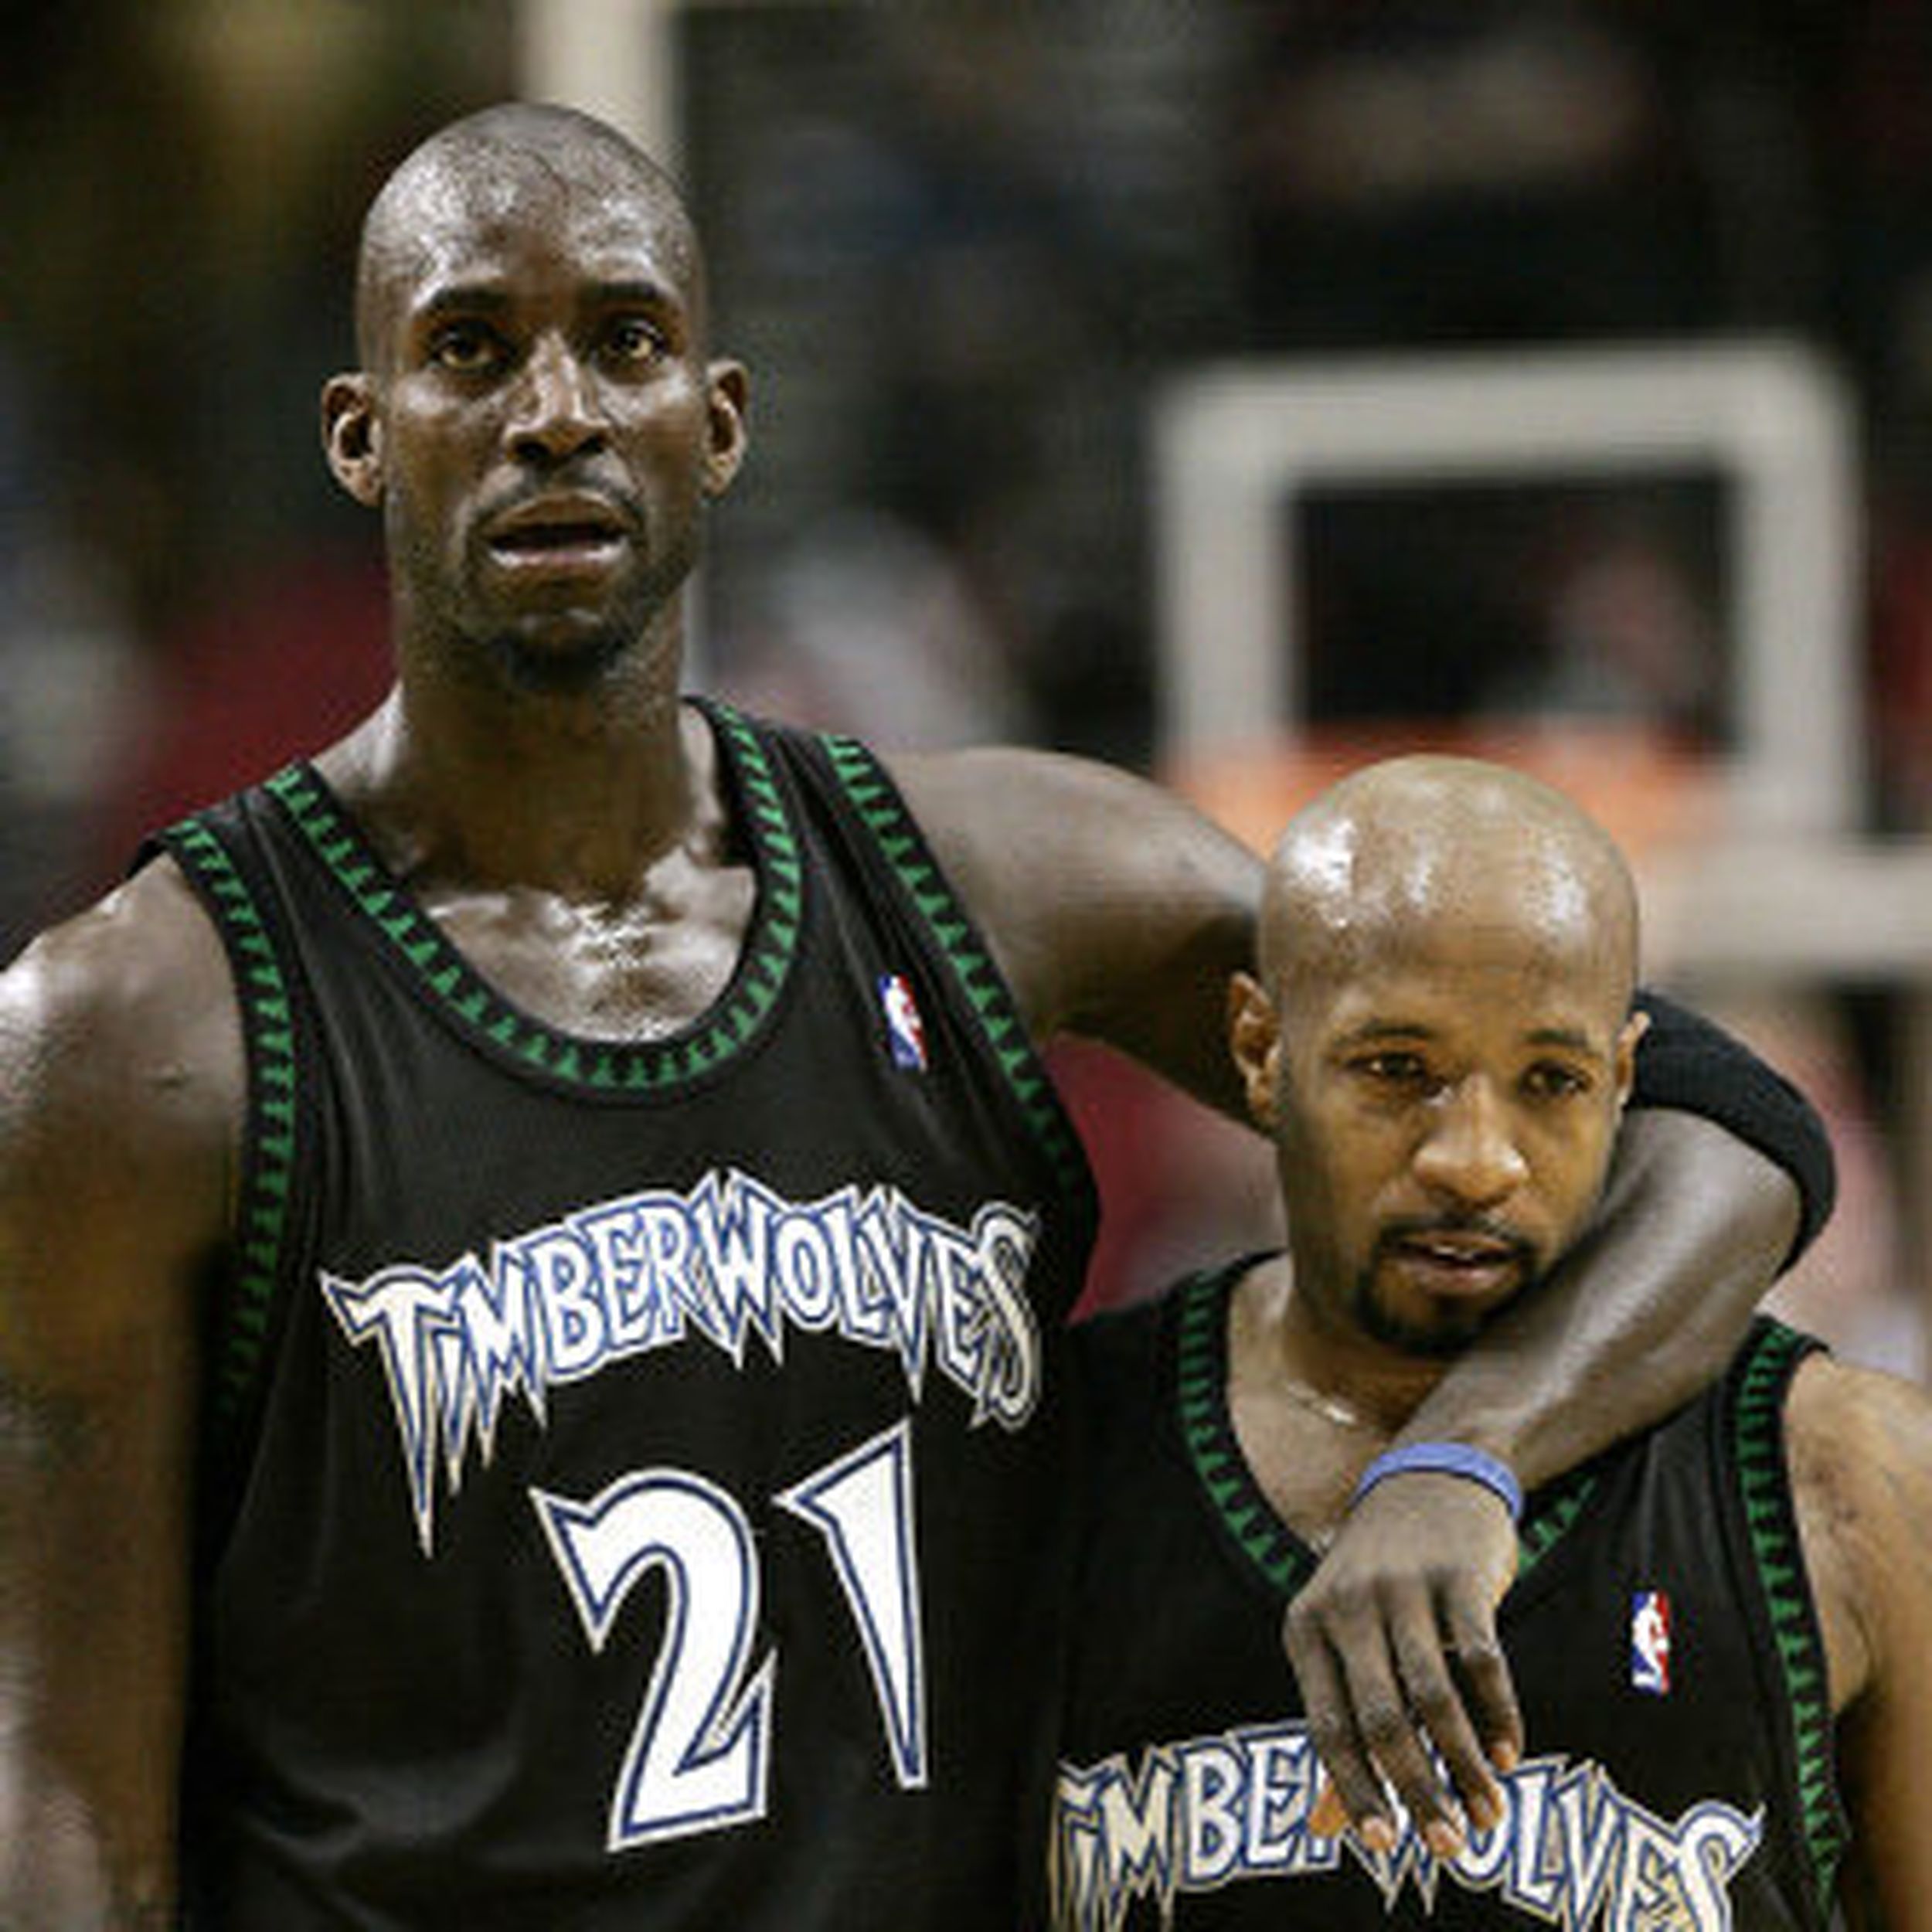 Kevin Garnett on why he chose to wear jersey number 21